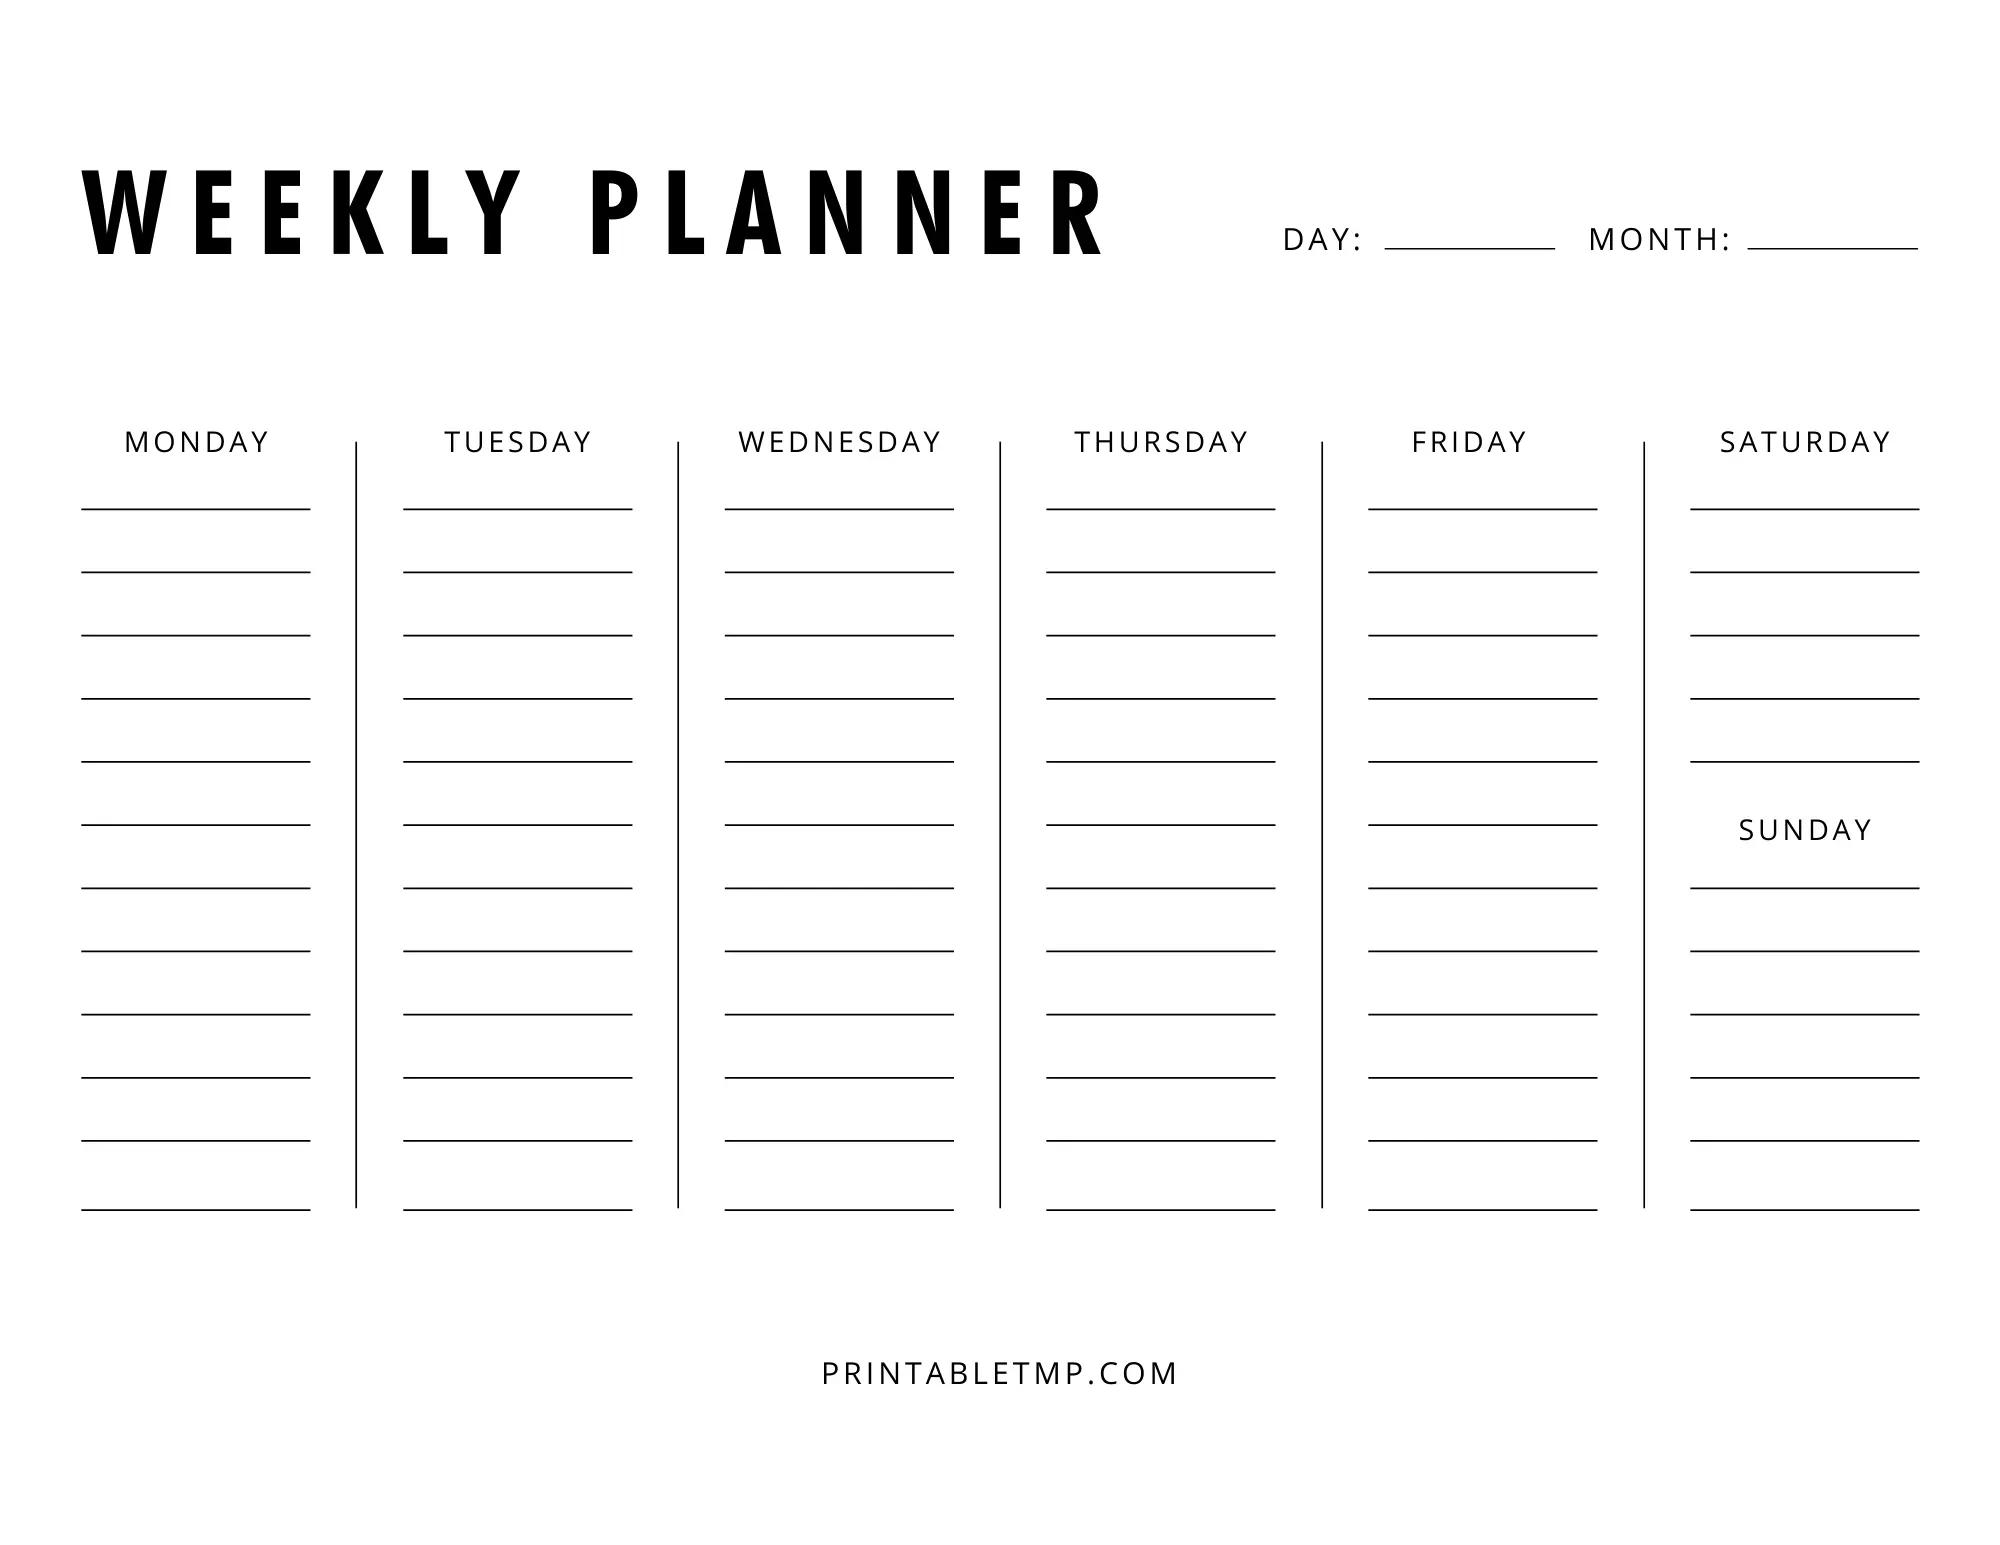 Daily Weekly Planner Template